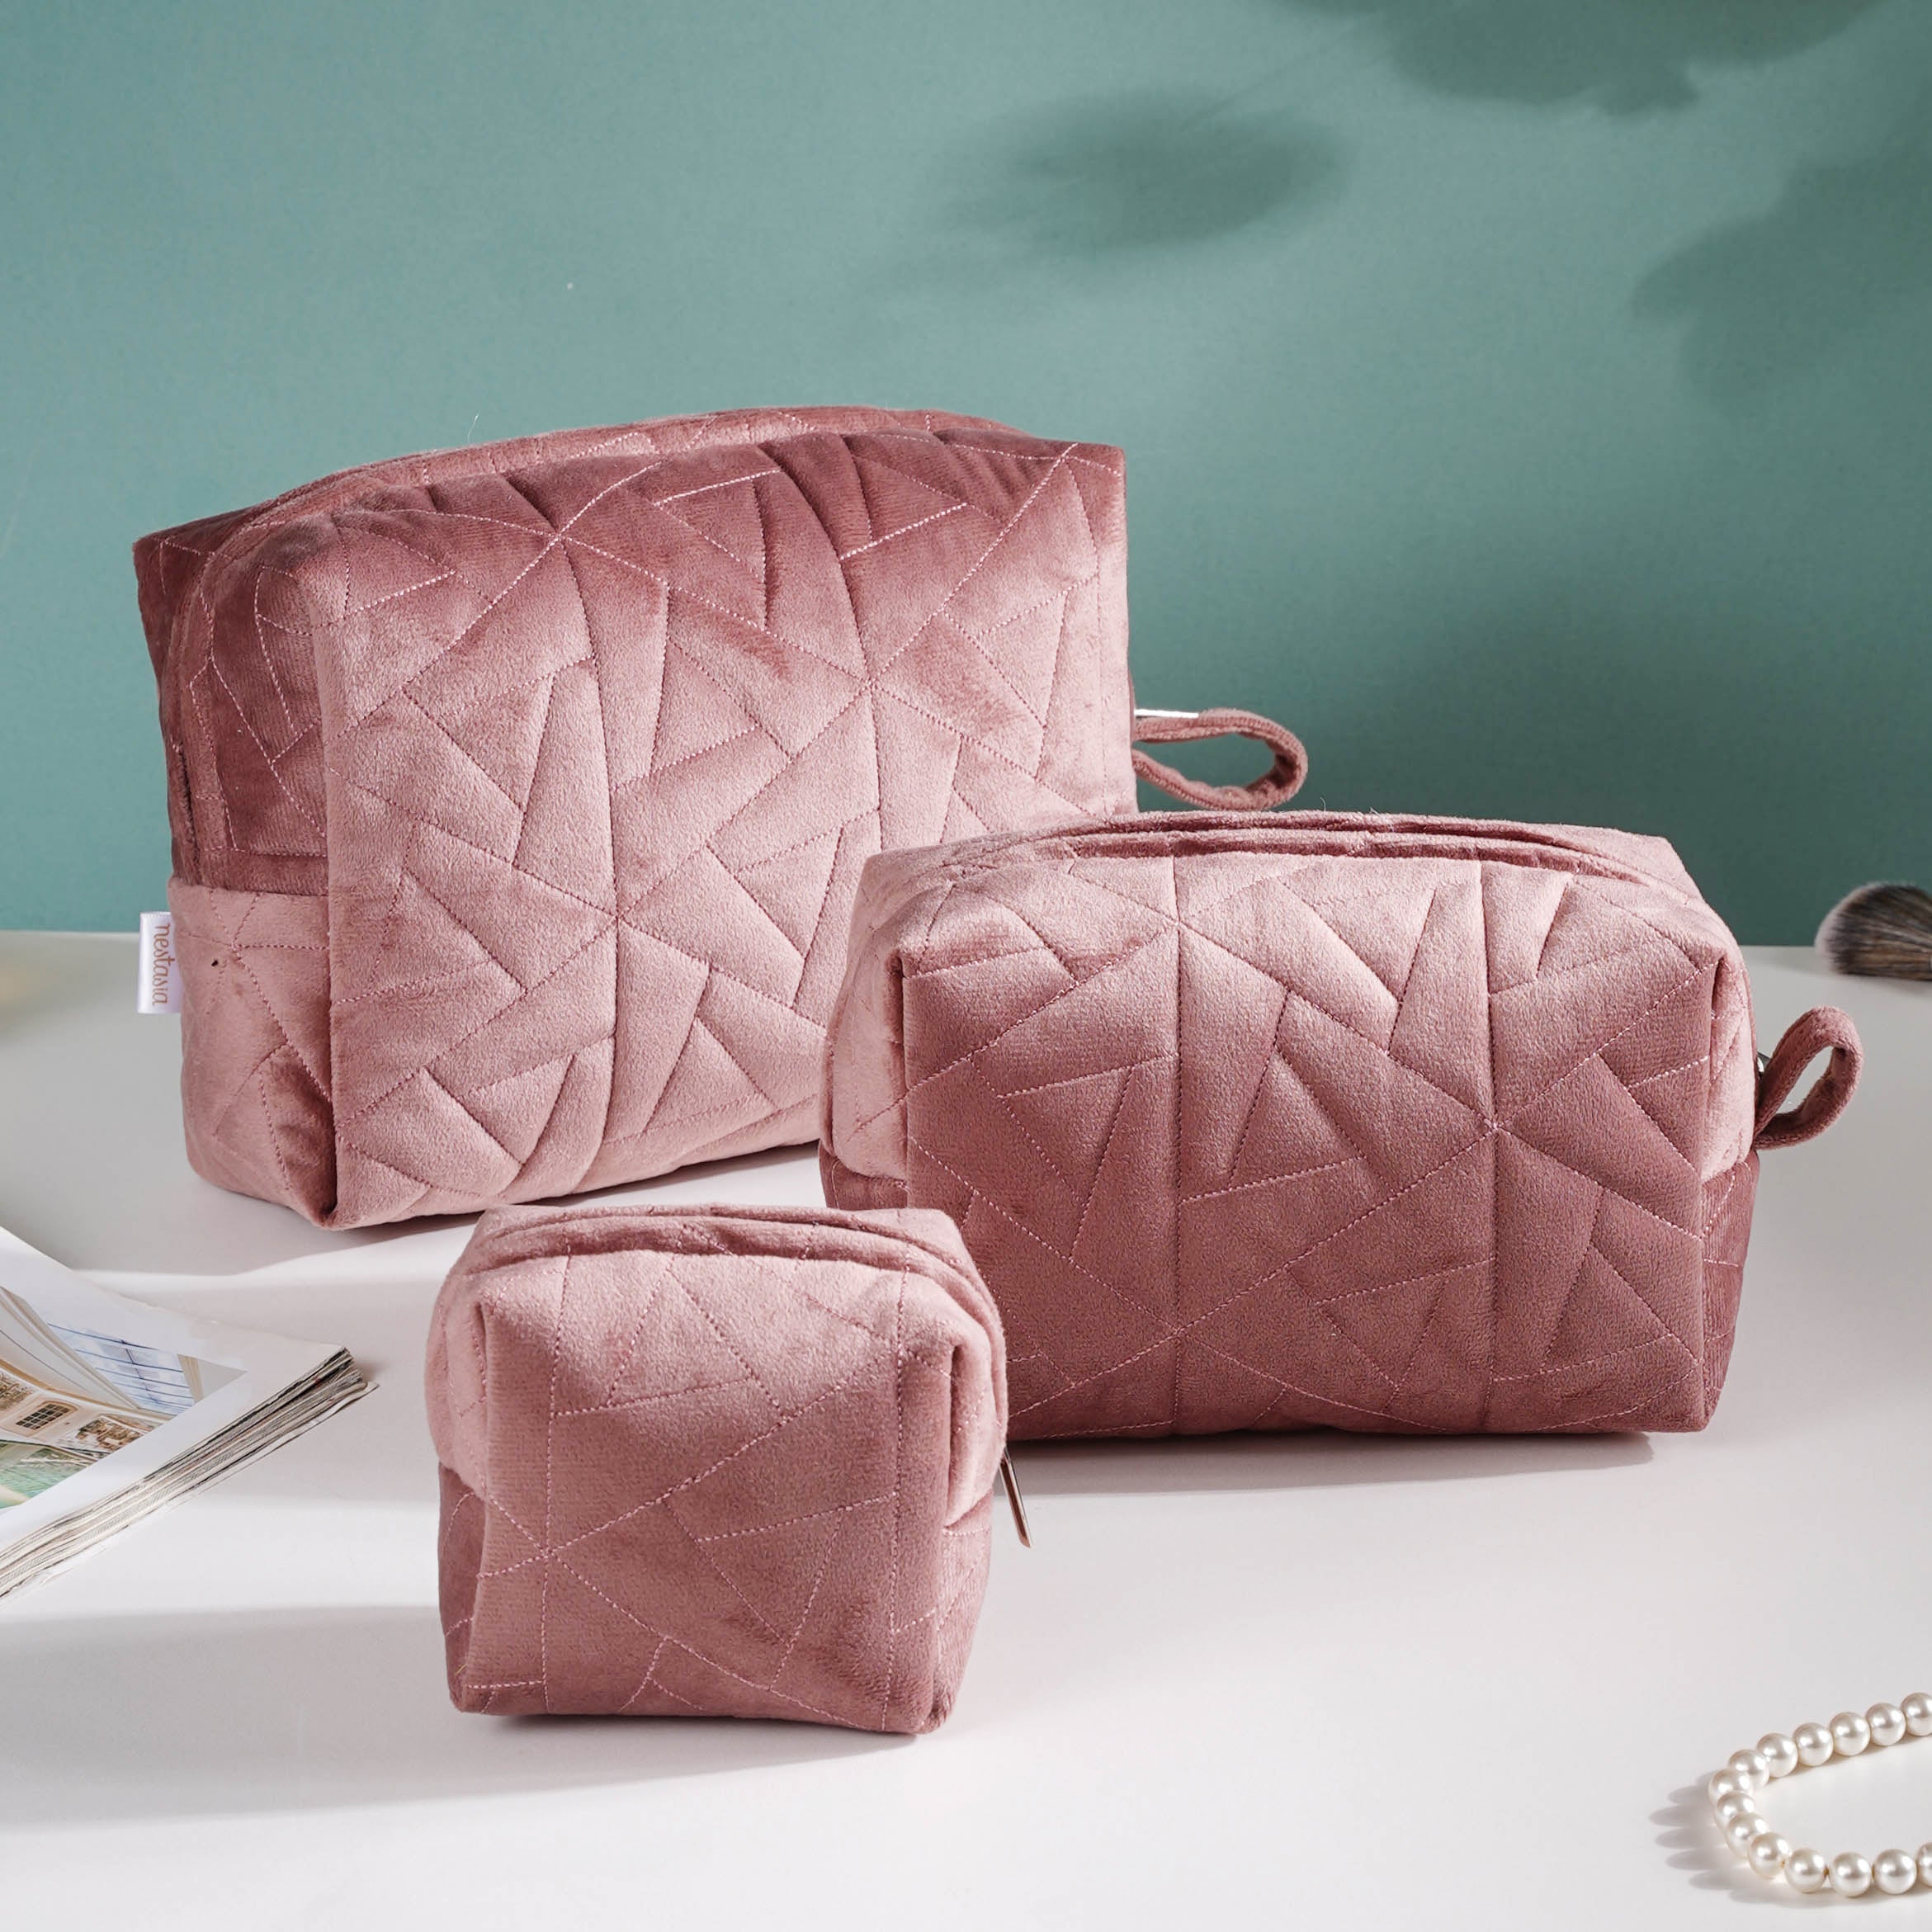 Square Quilted Puffy Plush Cosmetic Multifunction Makeup Bag – Pink  Sweetheart